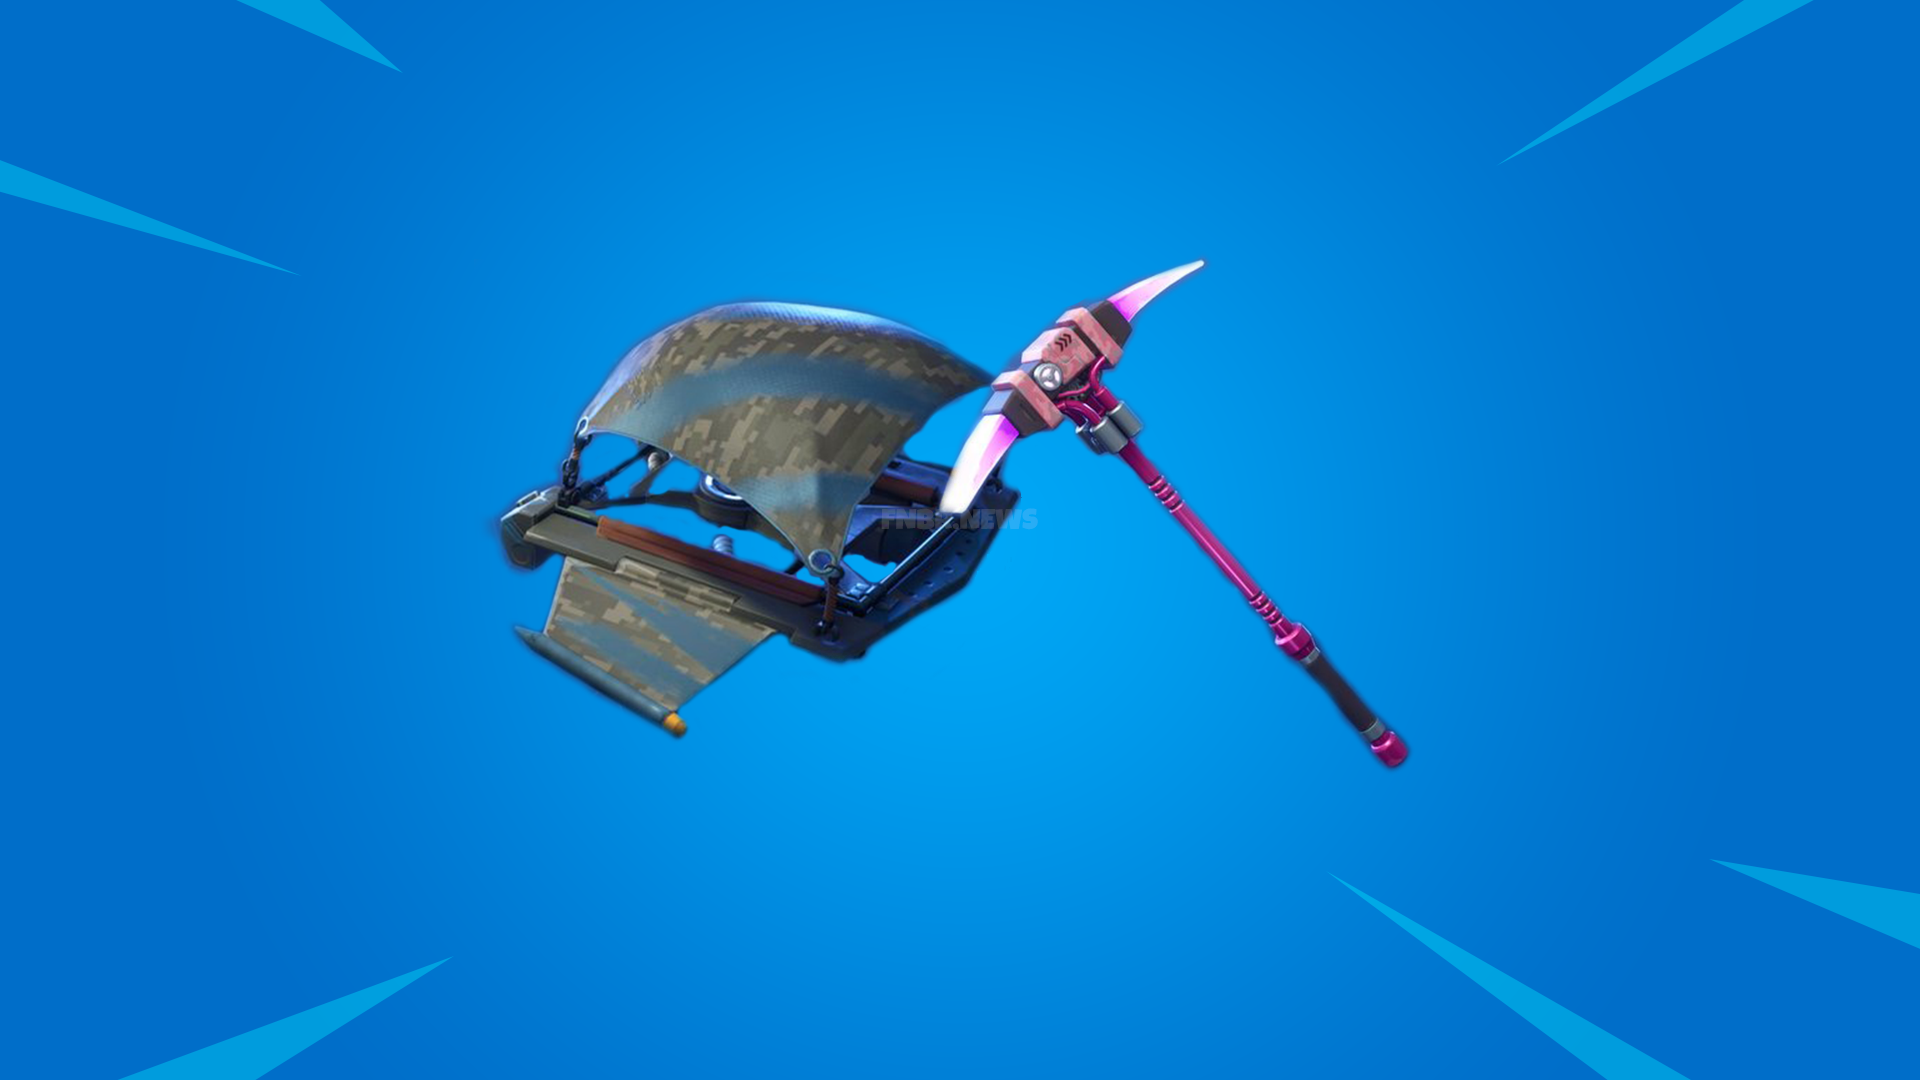 leak more battle royale rewards for save the world founders coming to fortnite - fortnite new leaked items